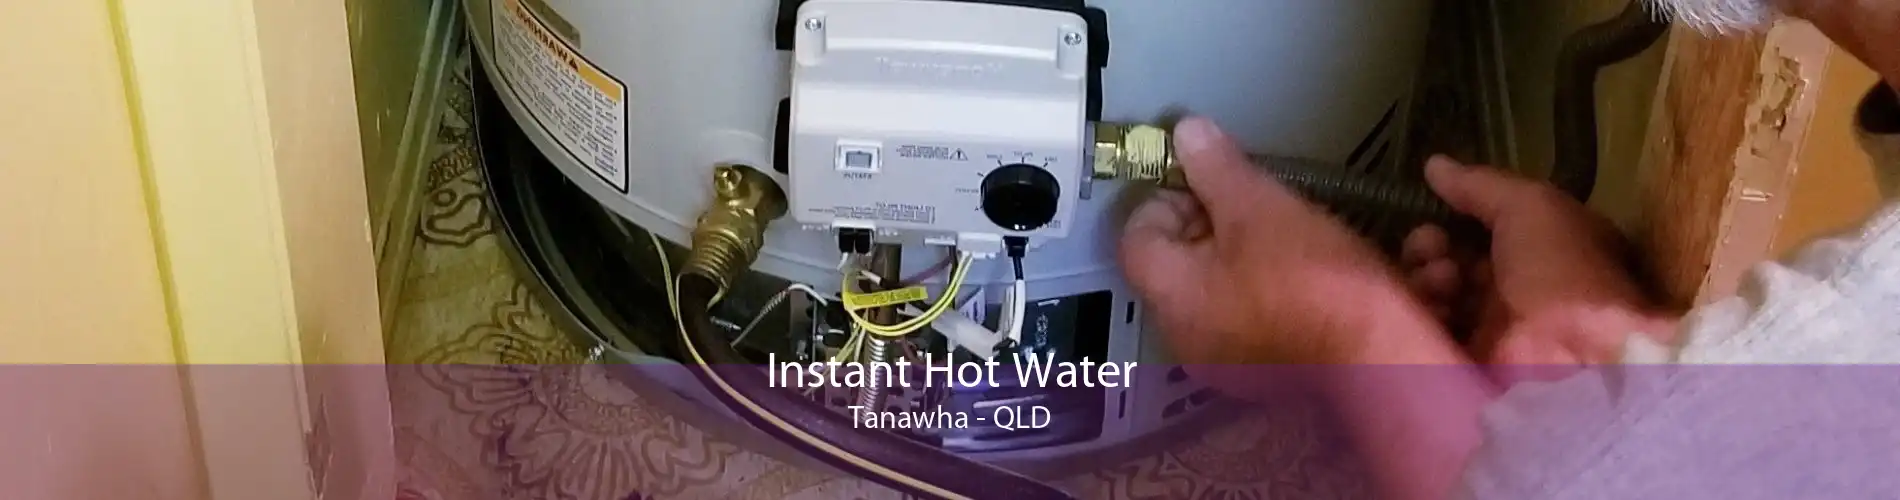 Instant Hot Water Tanawha - QLD